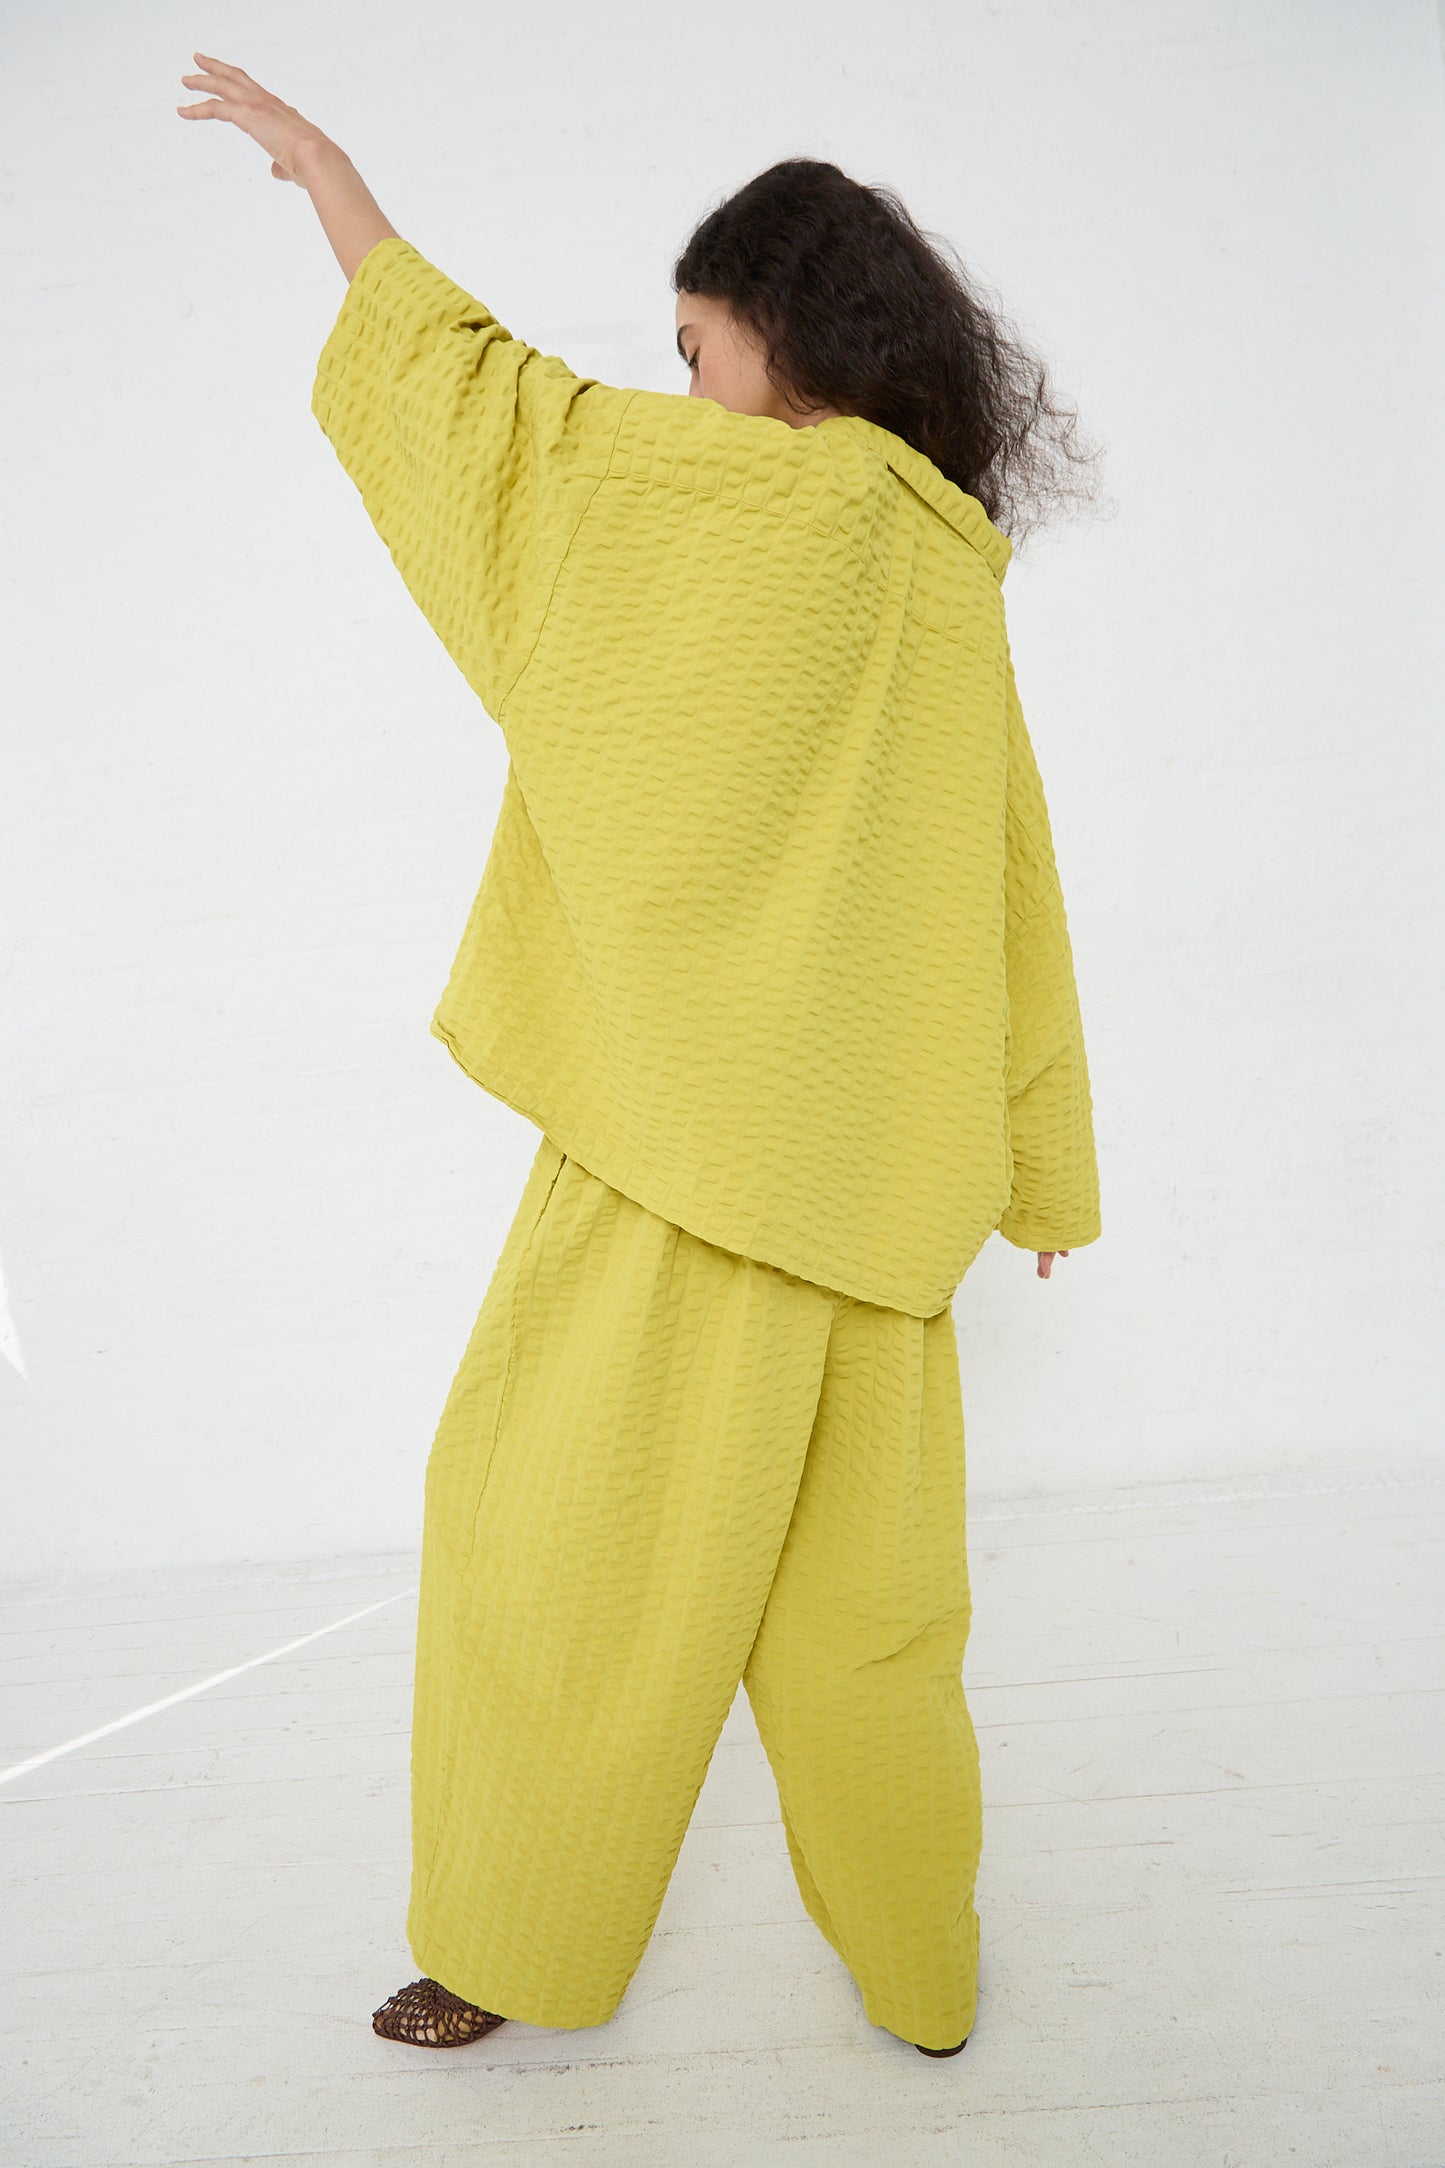 A woman in a Yellow Cotton Seersucker Chelsea Collar Shirt in Turmeric by Black Crane is standing with her back to the camera, extending her right arm upwards. Her left leg is slightly raised, visible from a side